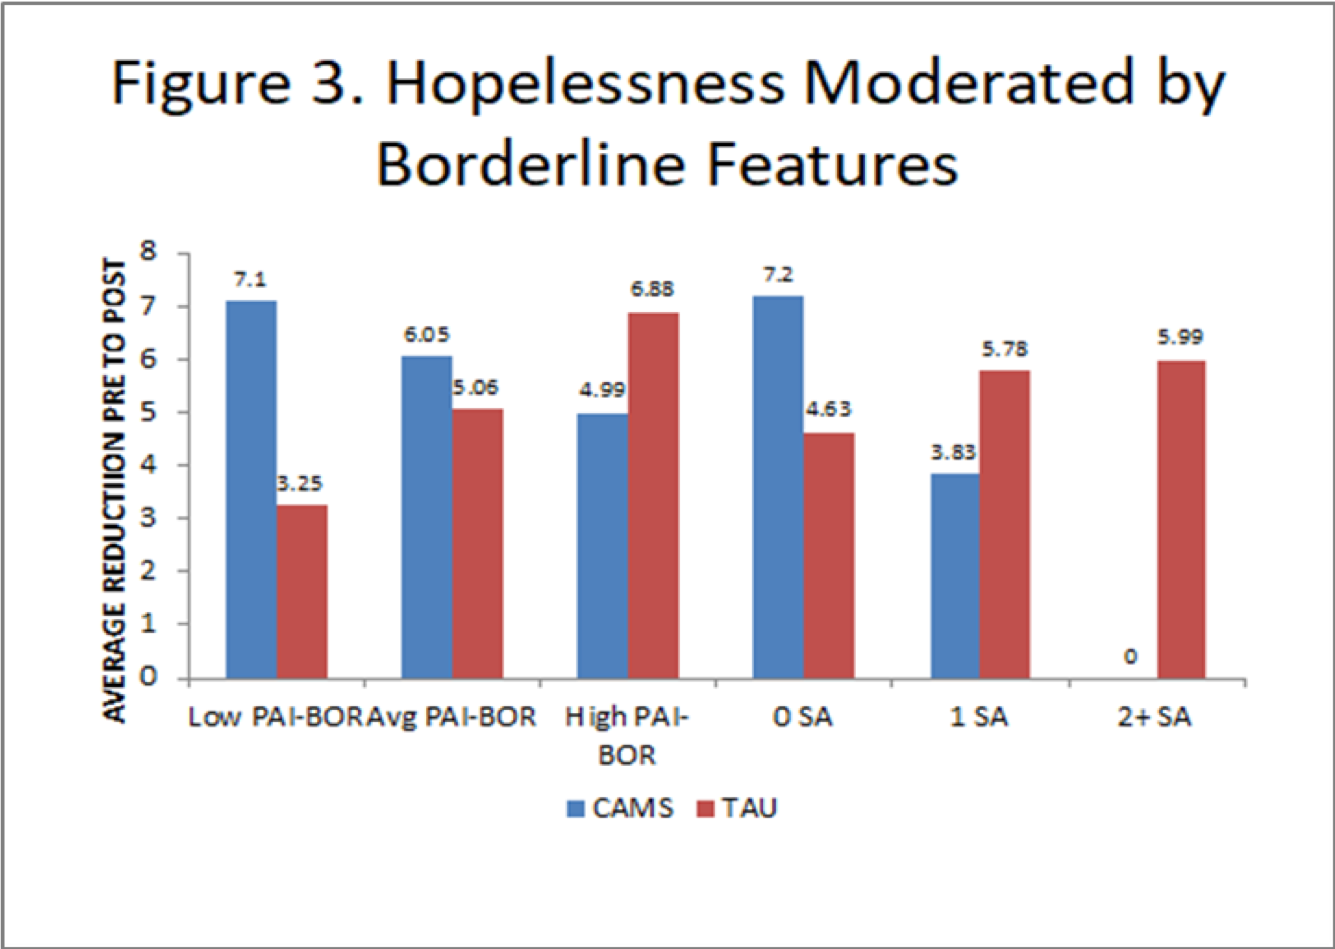 Figure 3. Hopelessness Moderated by Borderline Features; Full description appears after image.